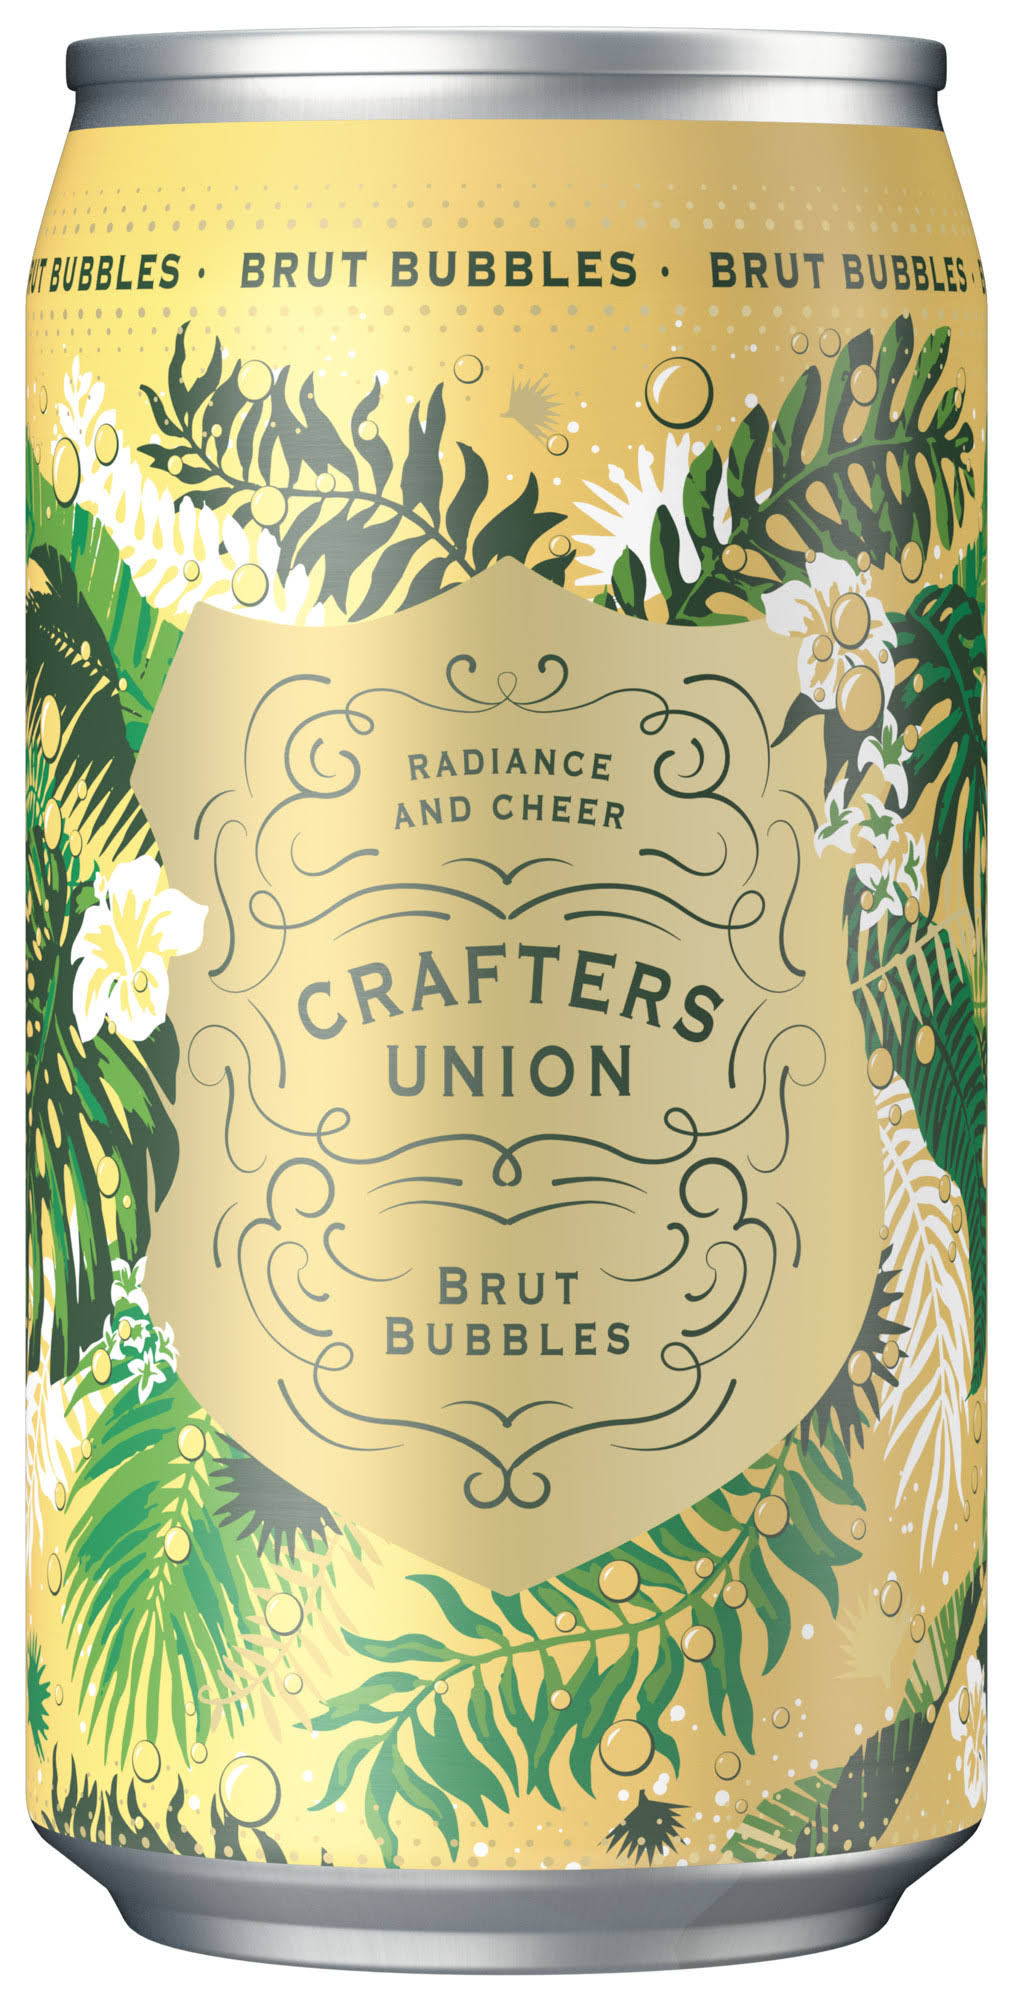 Crafters Union Brut Bubbles - 375 ml